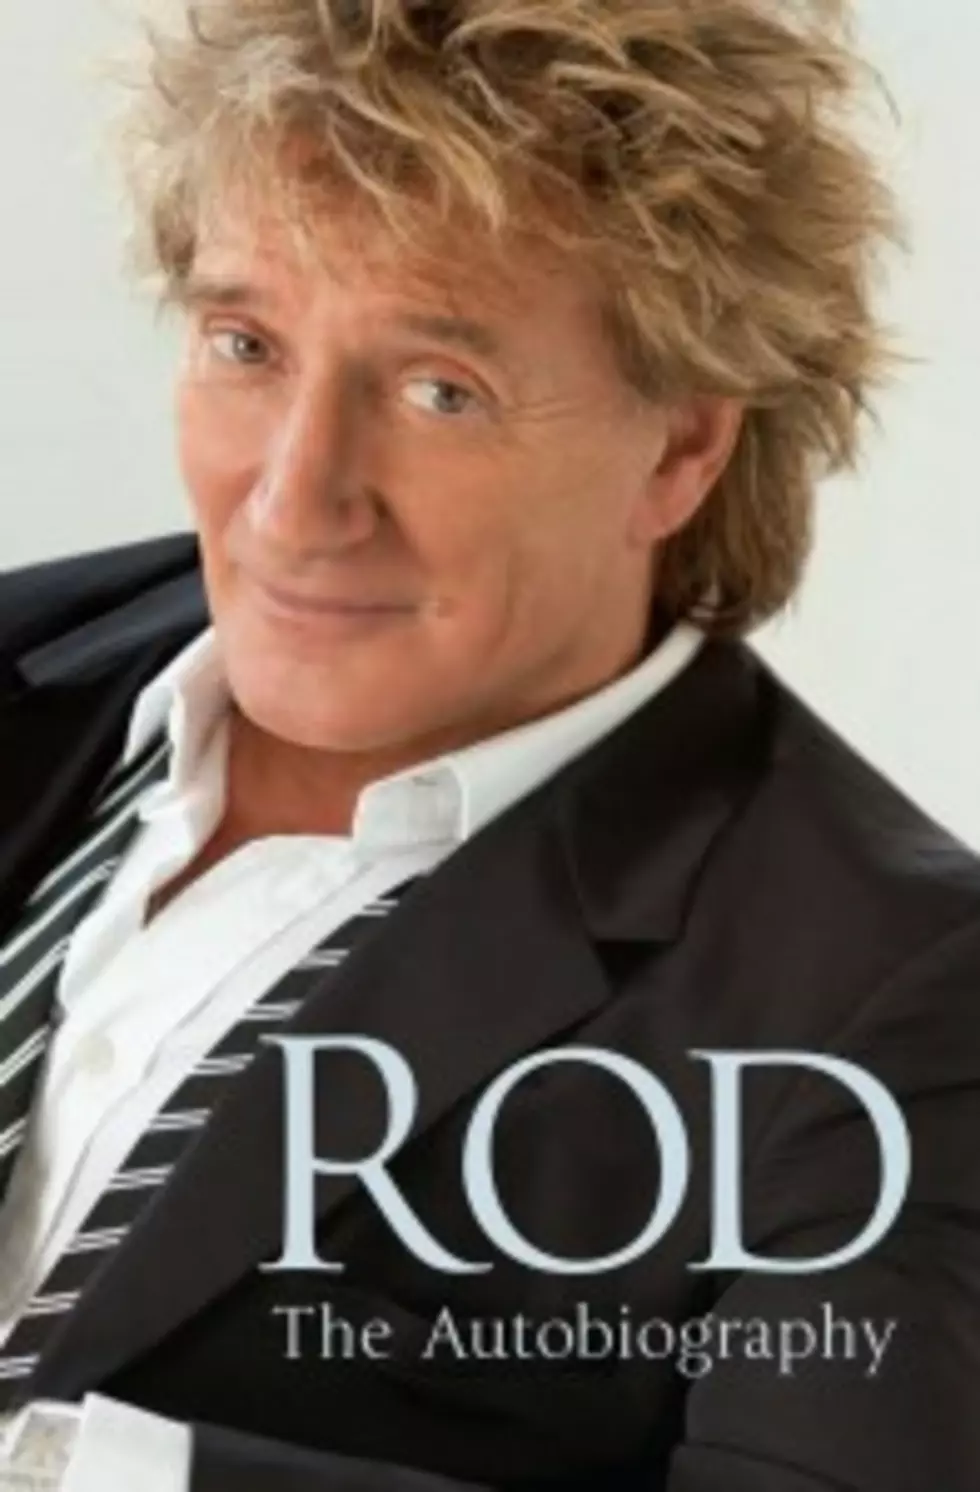 Rod Stewart Releases His New Book &#8220;Rod : The Autobiography&#8221; Tomorrow